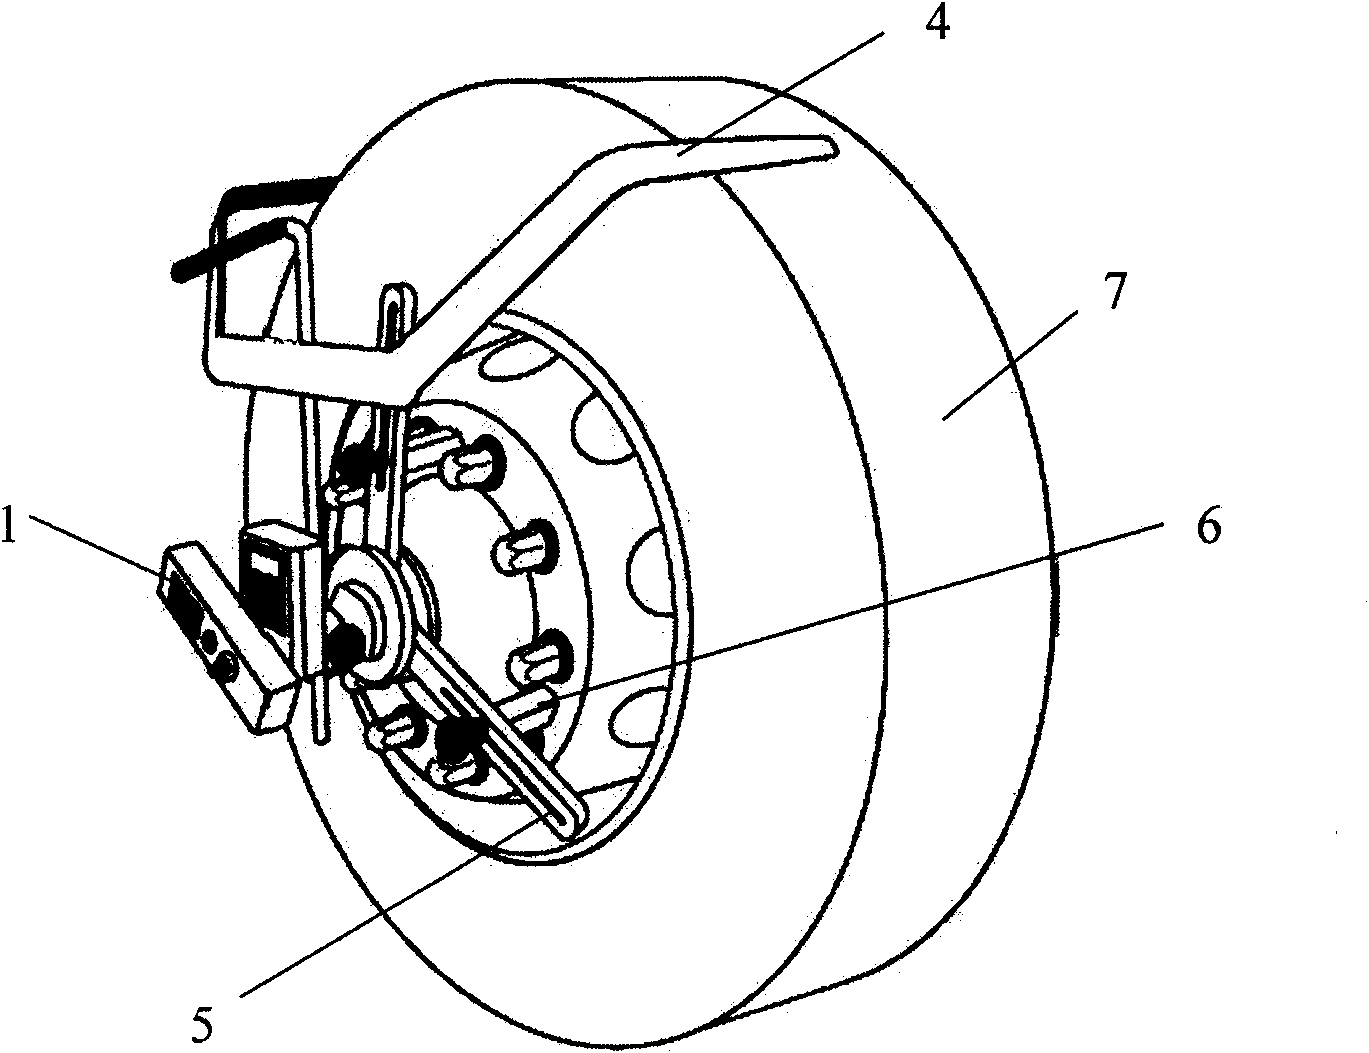 Laser measuring device for positioning wheel